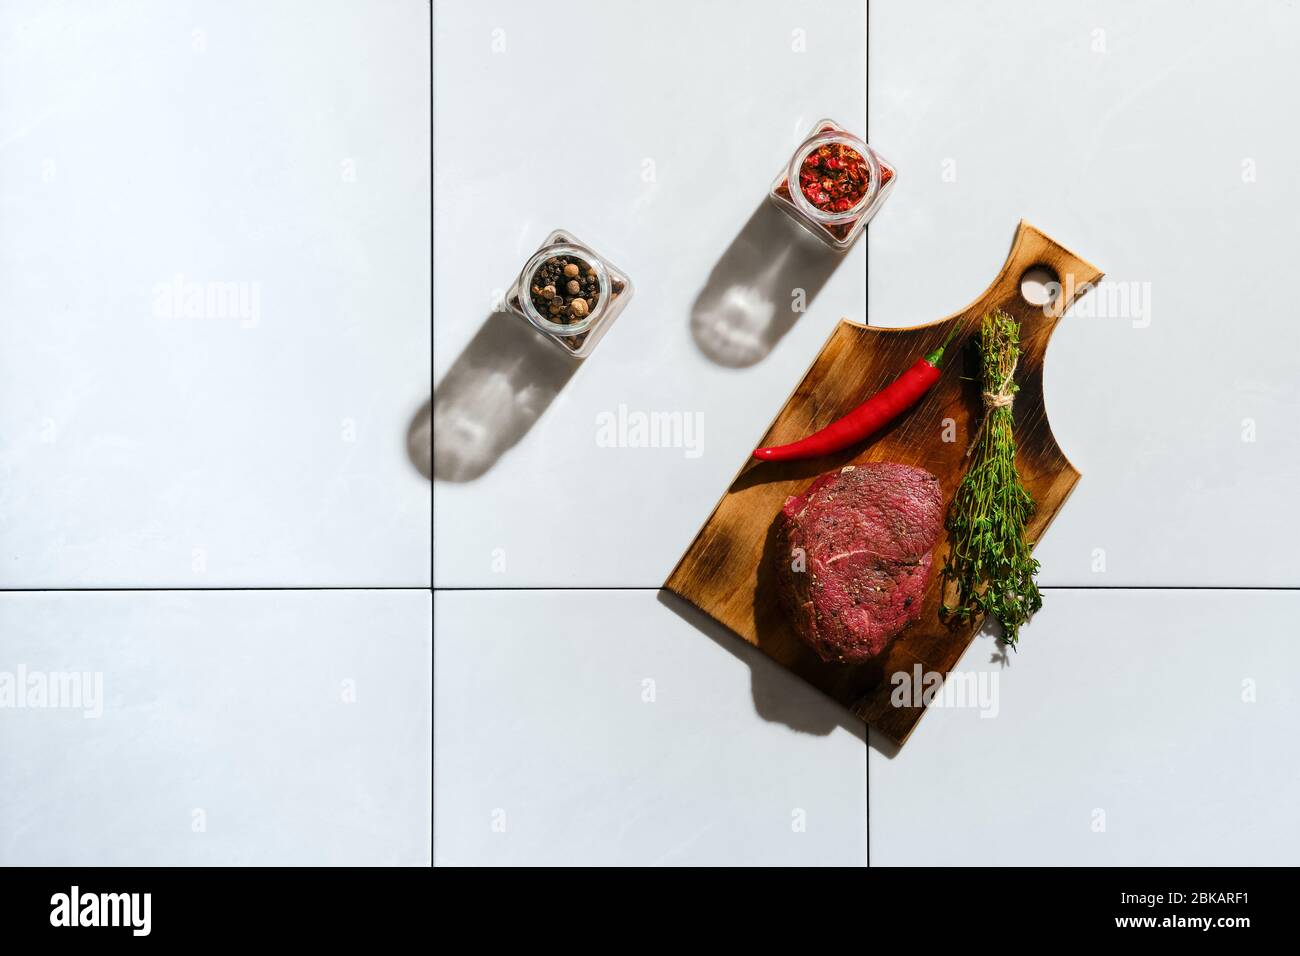 Top view of marinated raw beef steak with spice on ceramic tile with harsh shadow Stock Photo